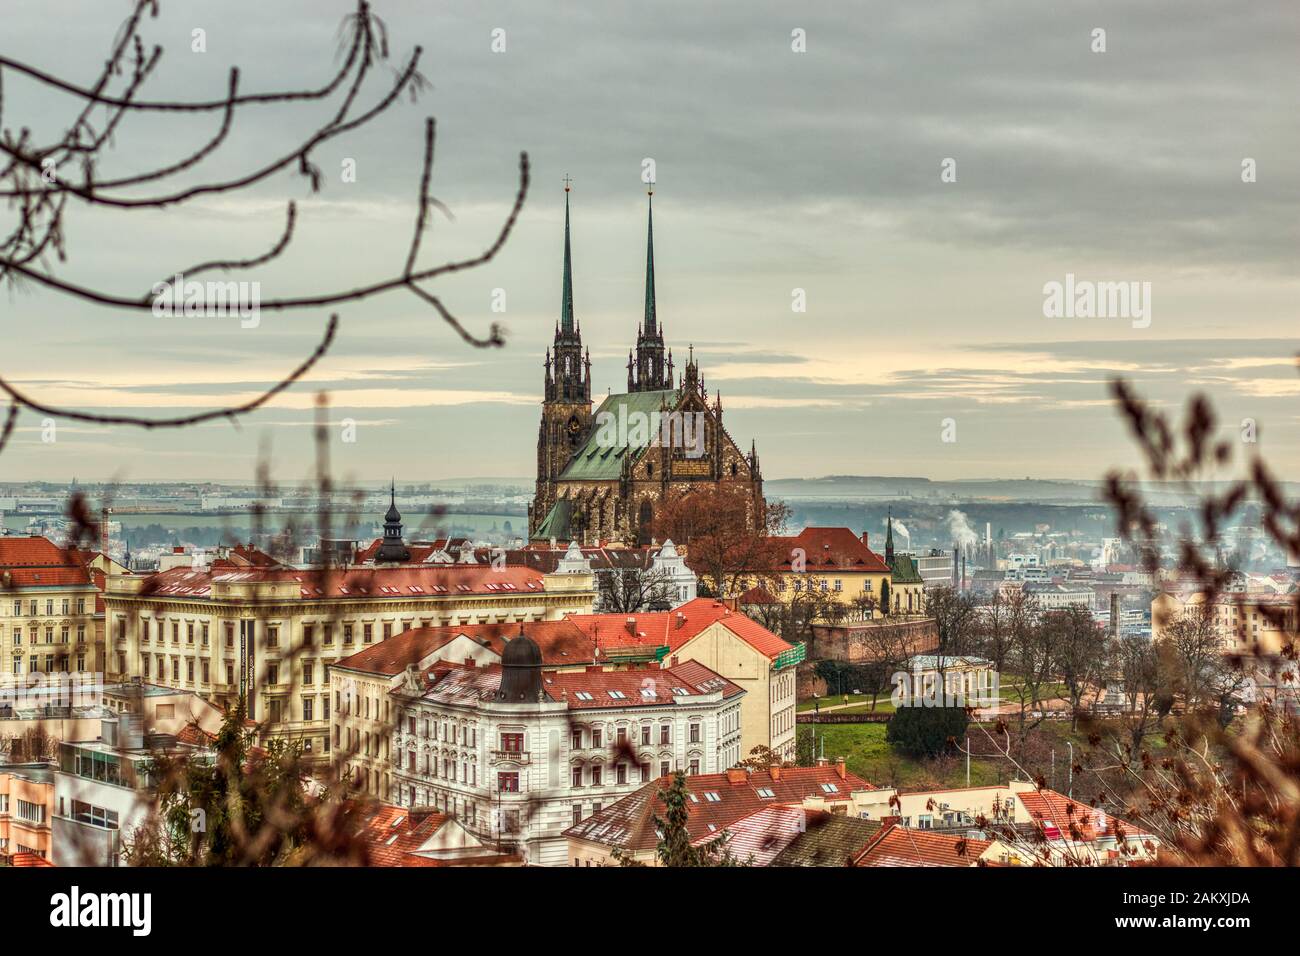 Brno Czech Republic January 10 of 2020 - Cathedral of St. Peter and Paul under autumn clouds with light snow on houses buildings on beautiful sunset Stock Photo